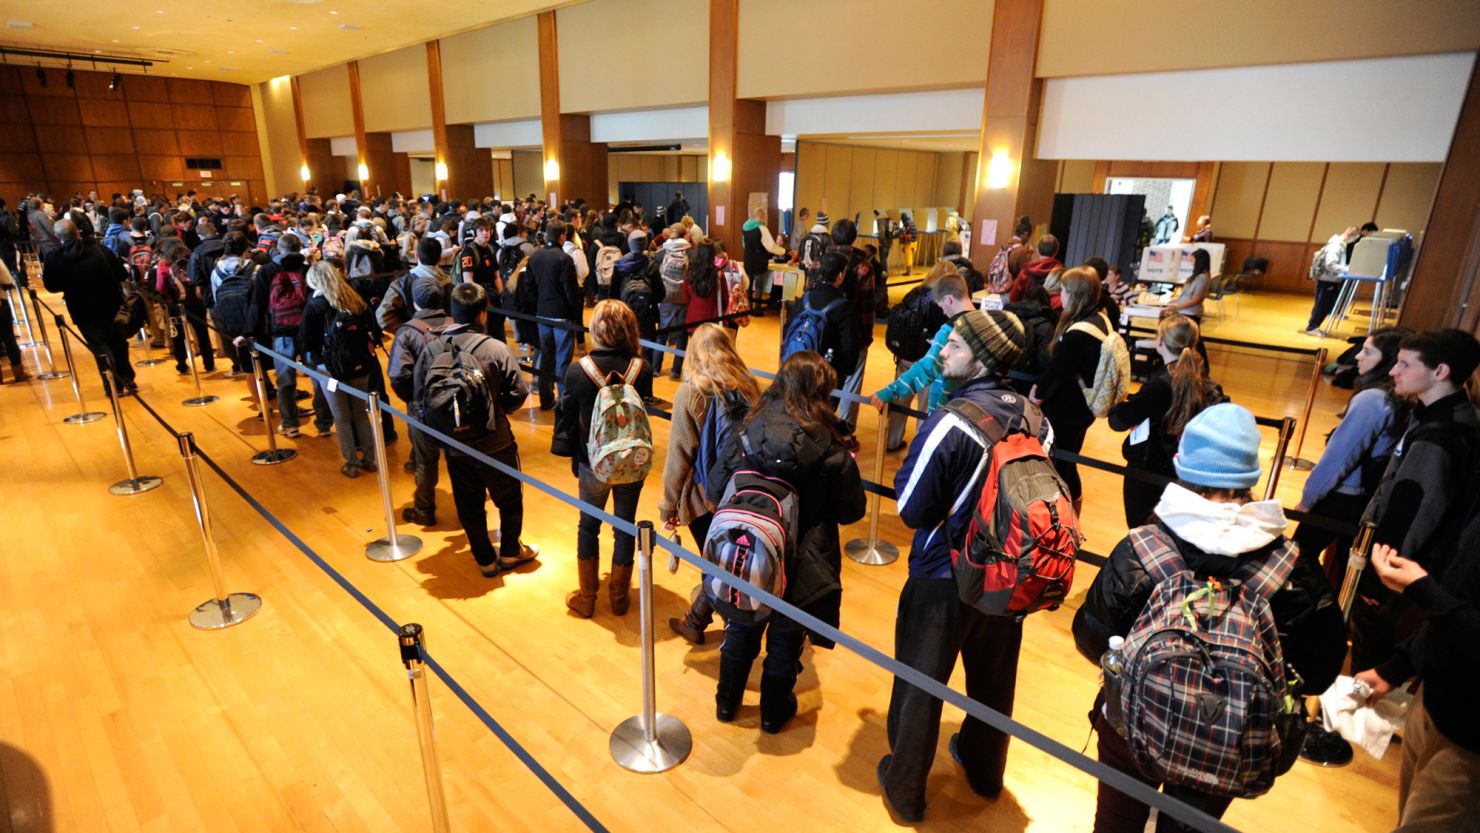 Penn State University students wait in line to vote on campus in State College, Pennsylvania.